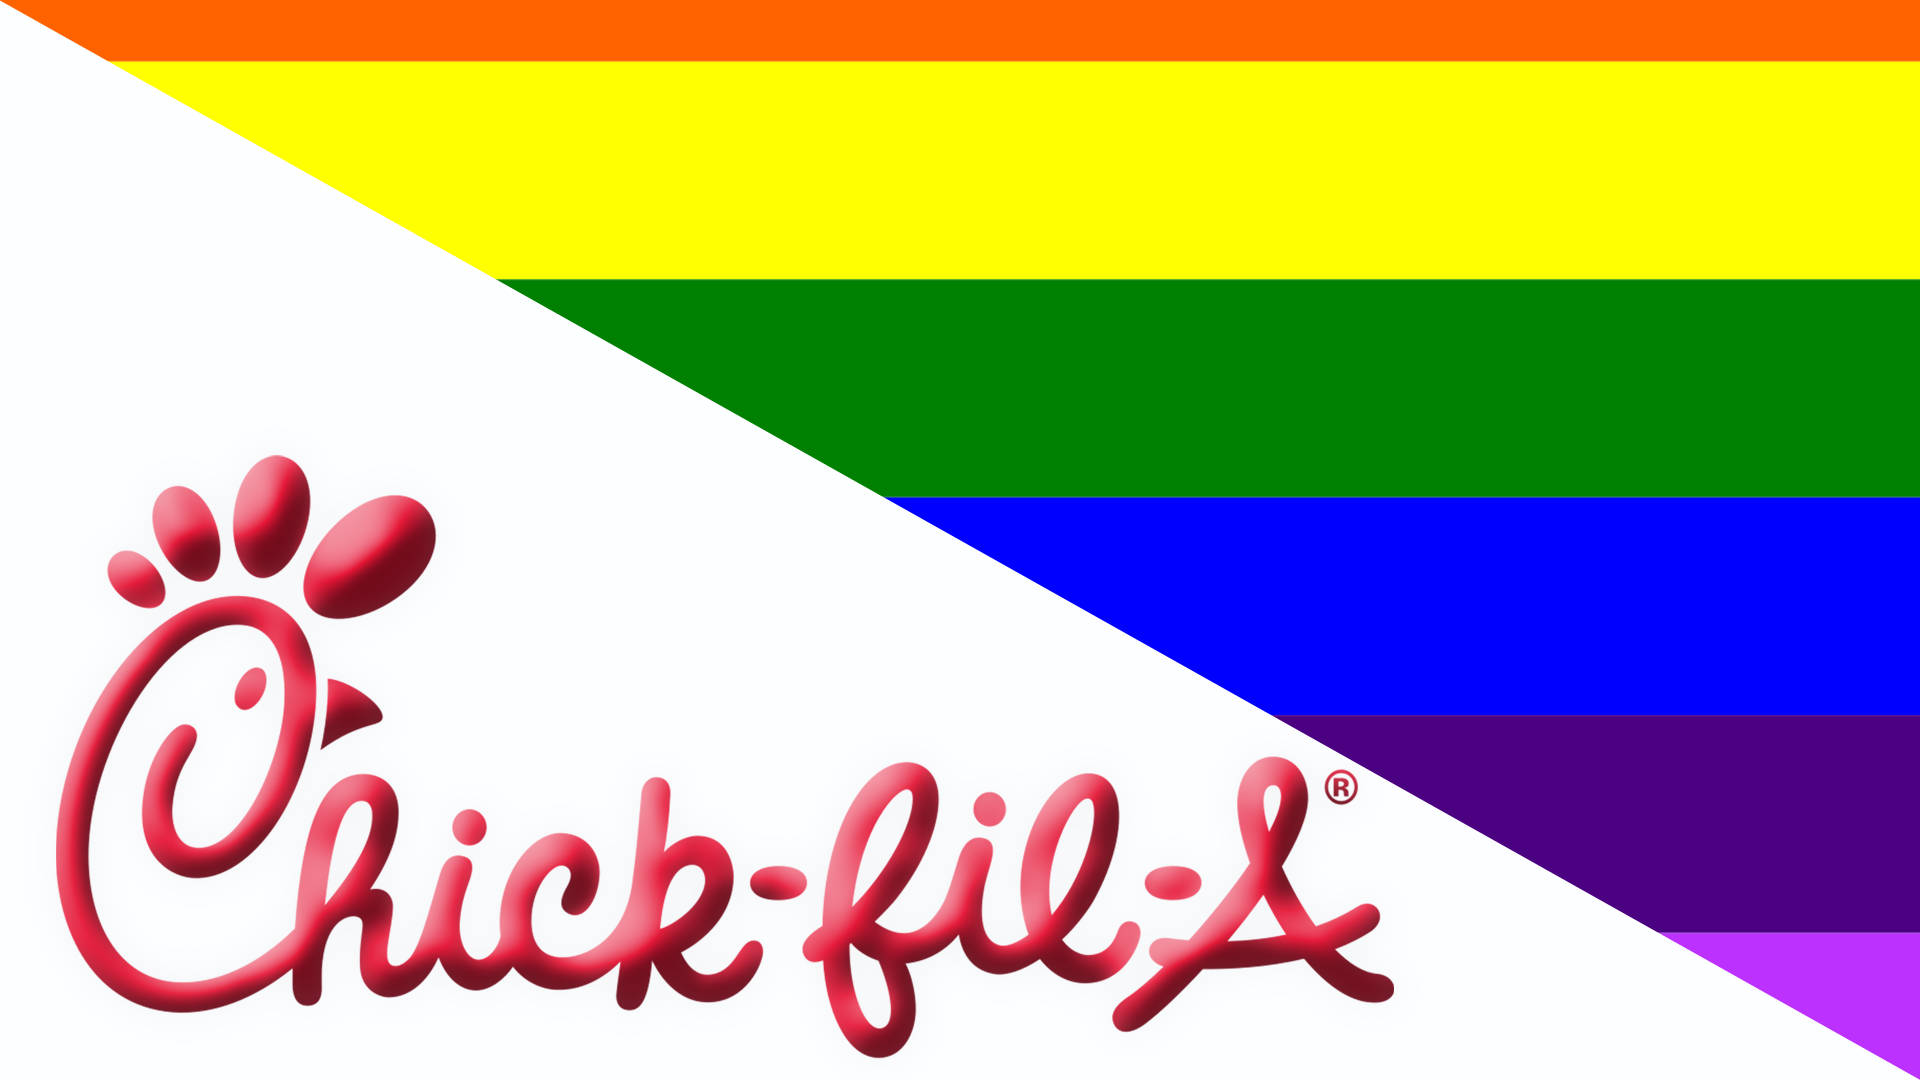 Chick Fil A Rainbow Poster